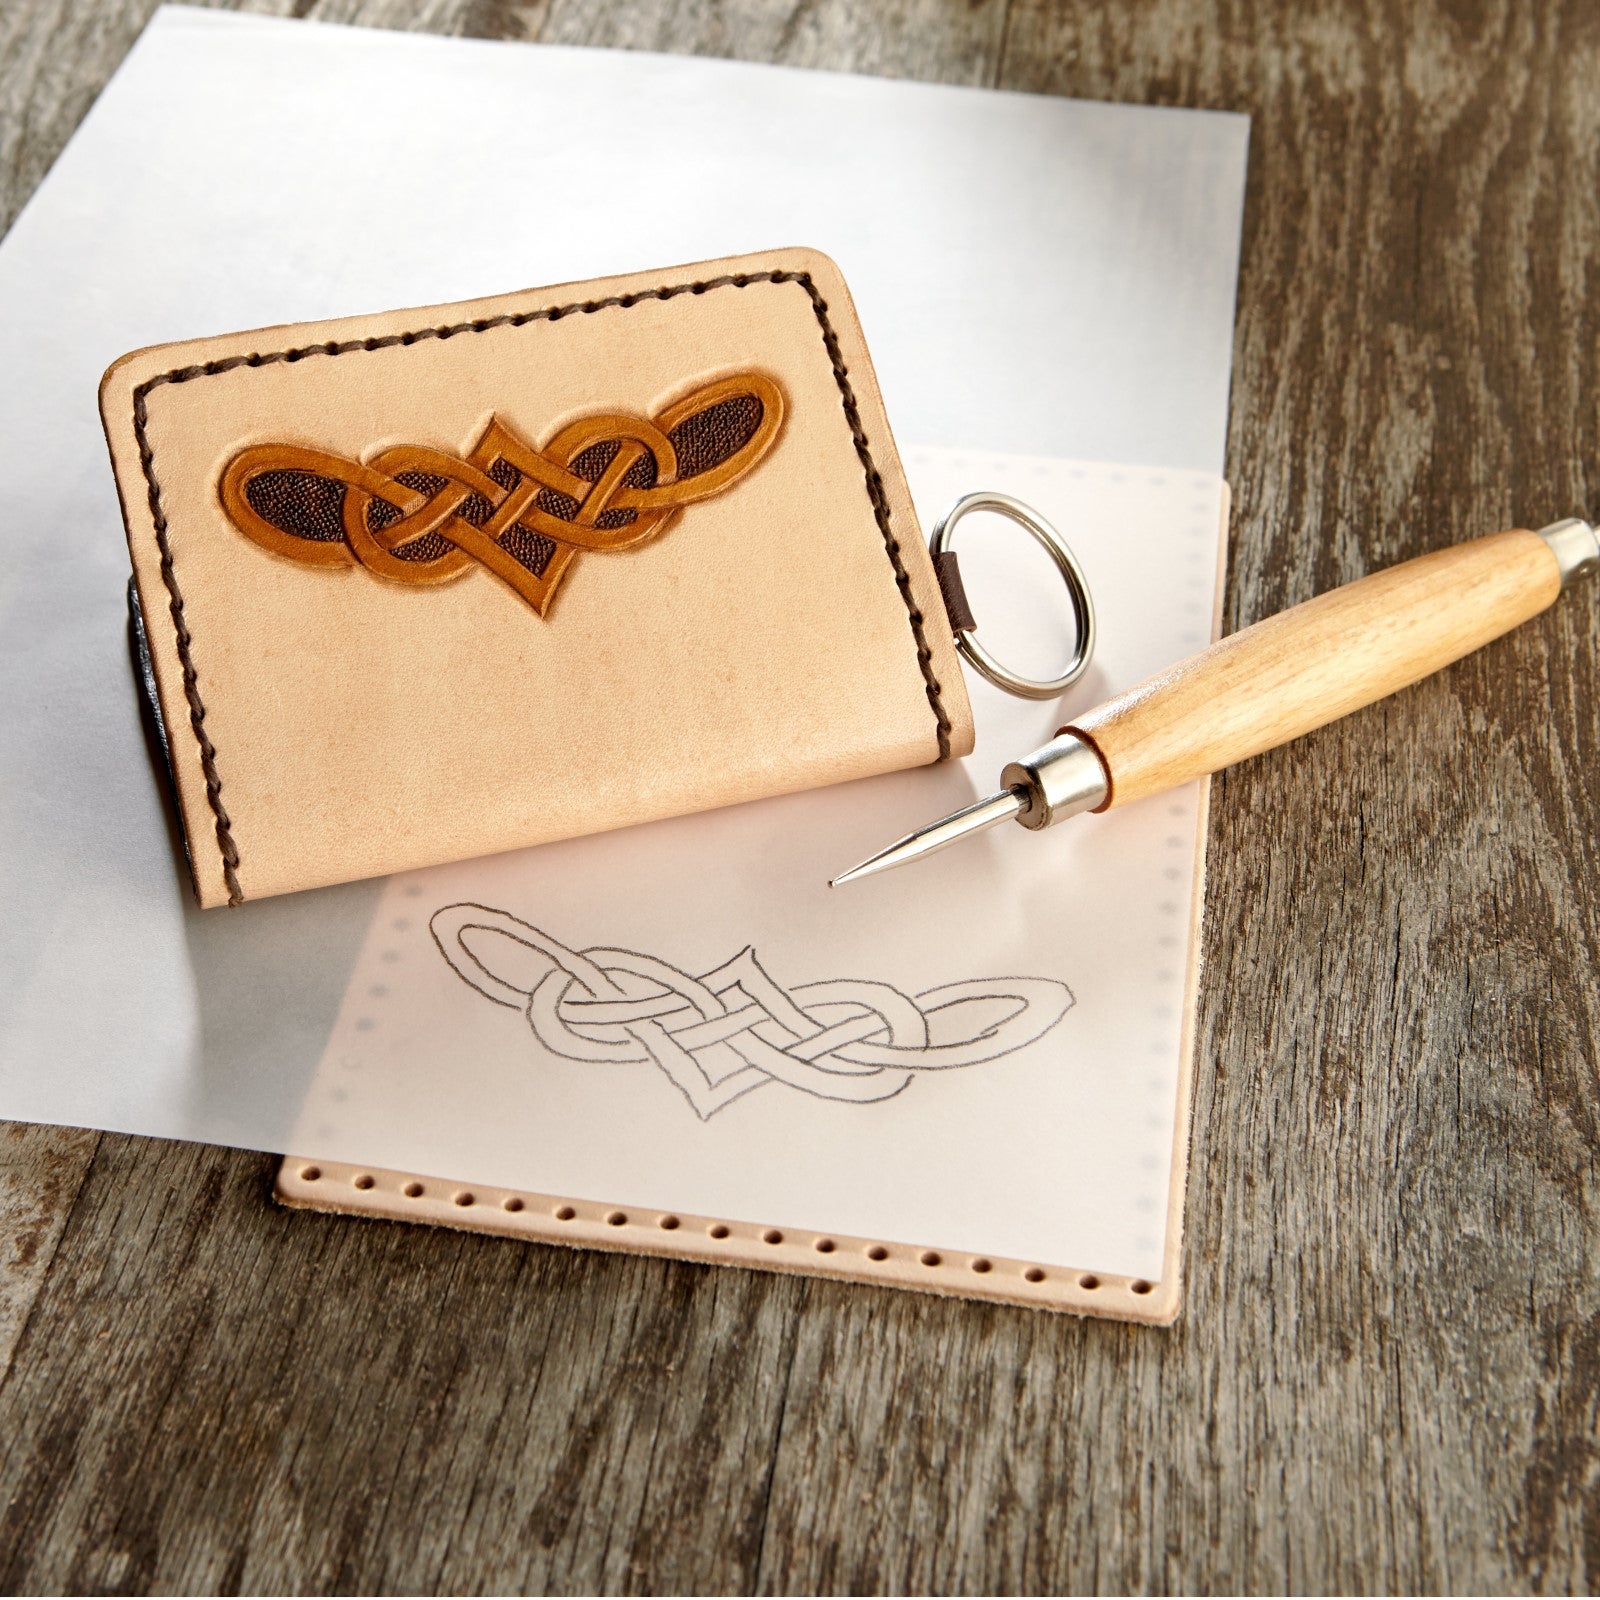 Tracing Tool & Modeling Spoon,  | The Leather Guy